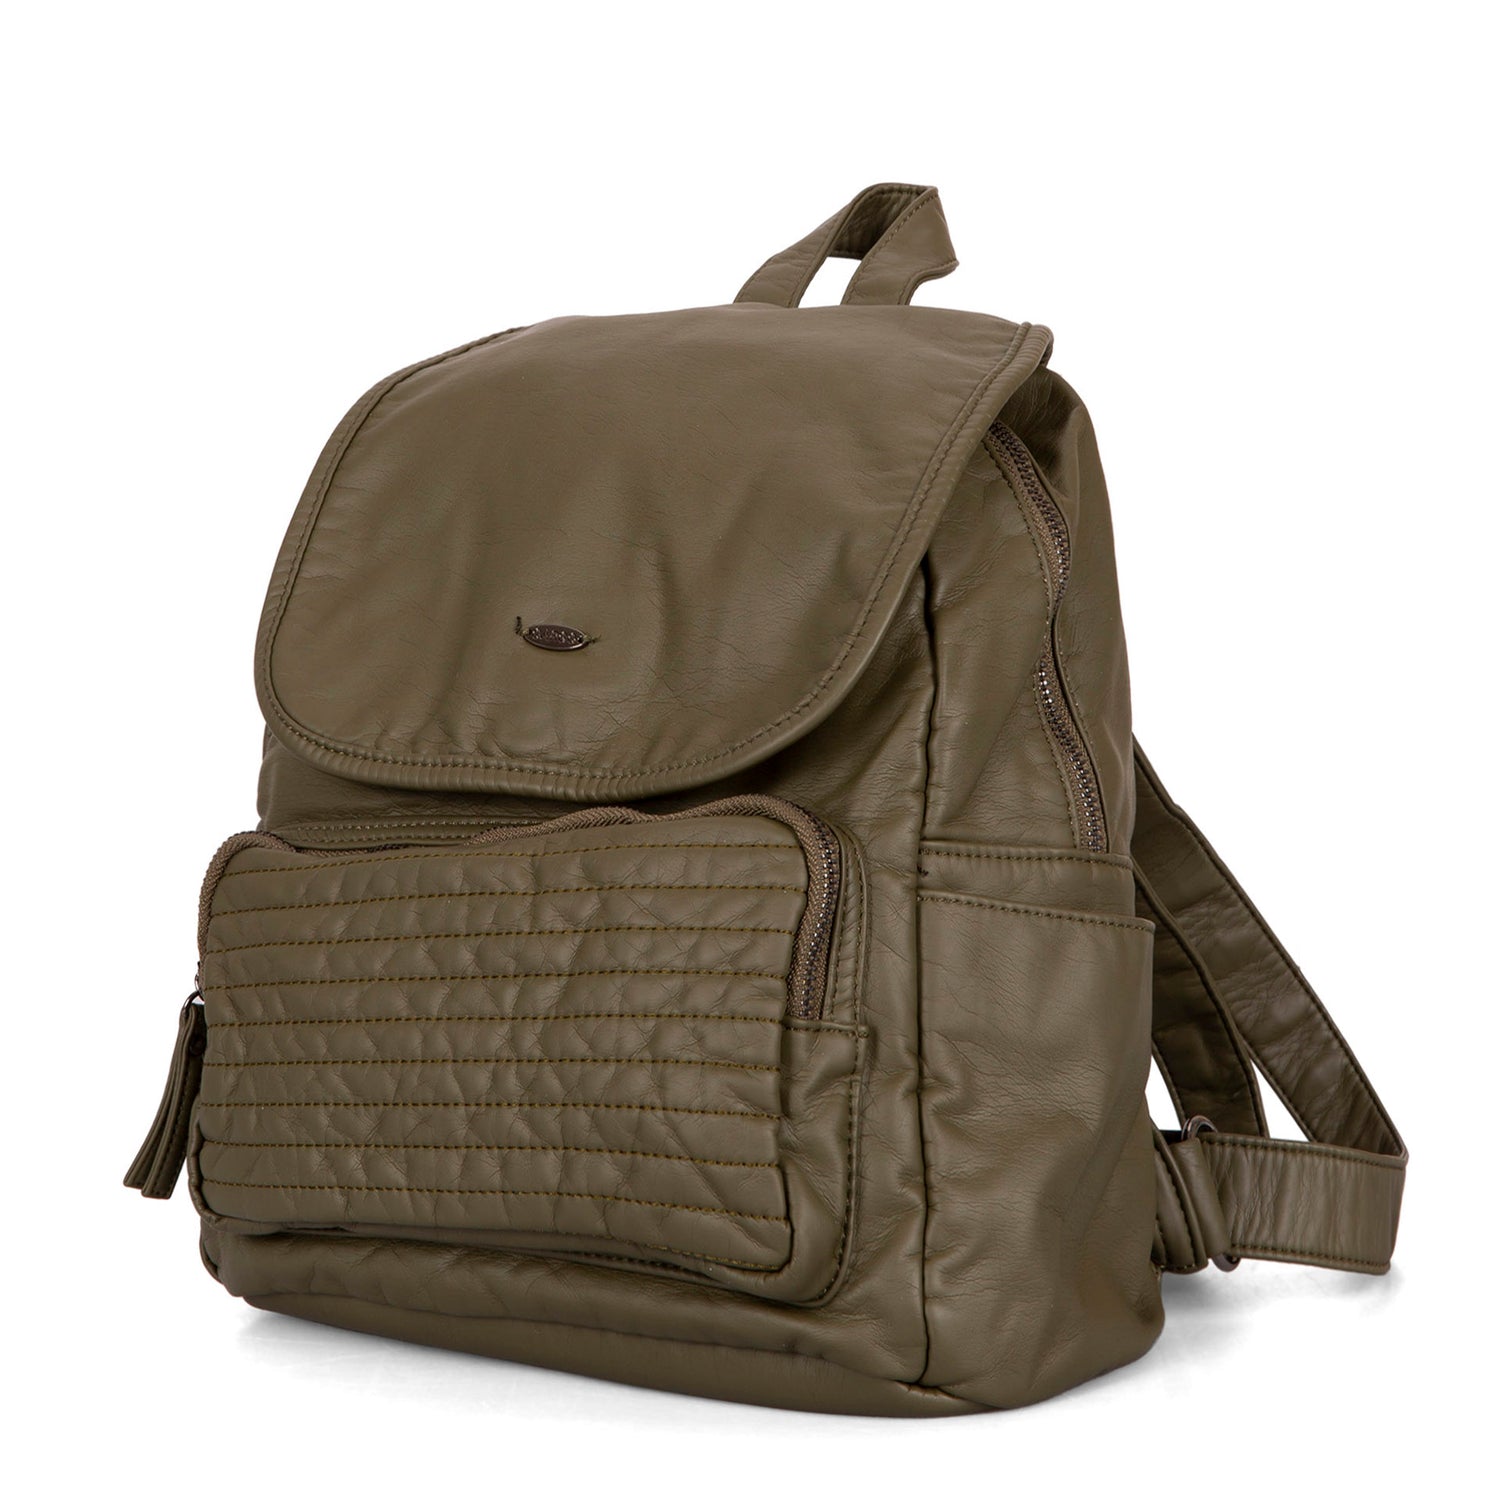 Quilted Flap Backpack - Bentley